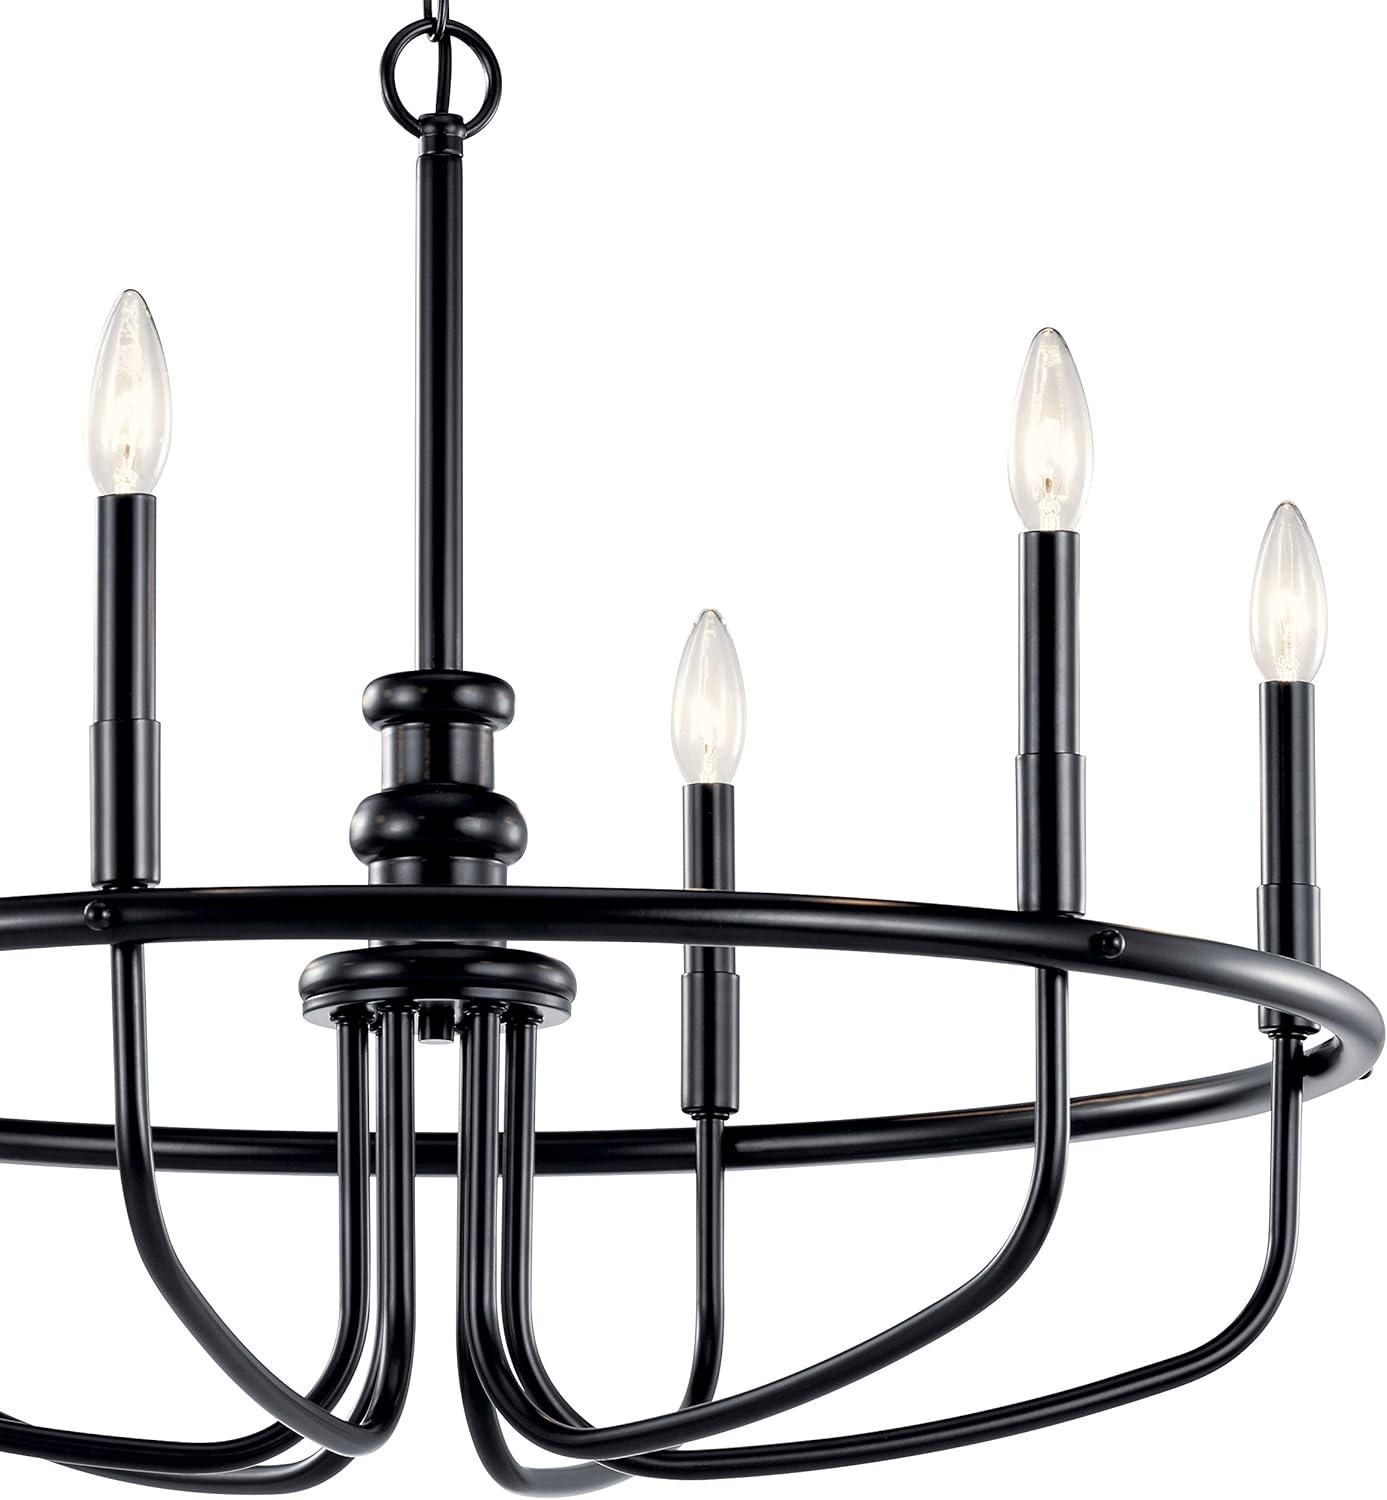 Capitol Hill Modern Black 6-Light Chandelier with Candle Sleeves